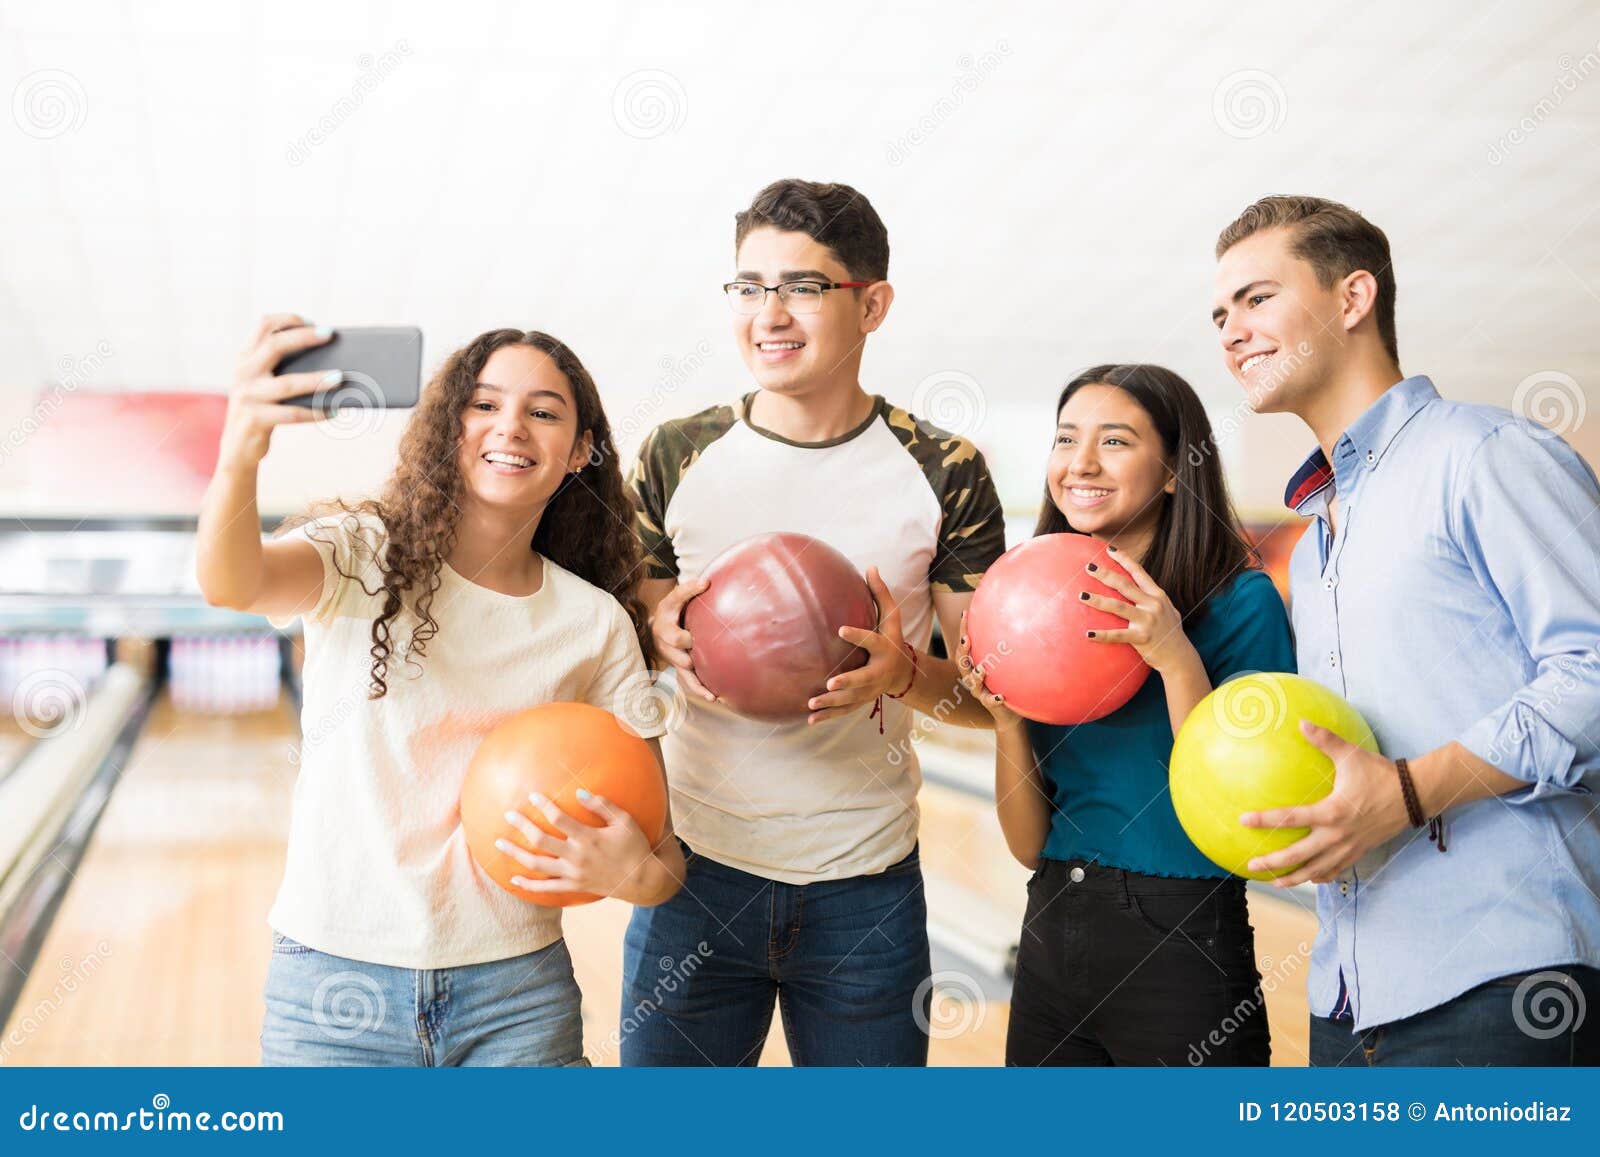 teens capturing memories of bowling on mobile phone in alley